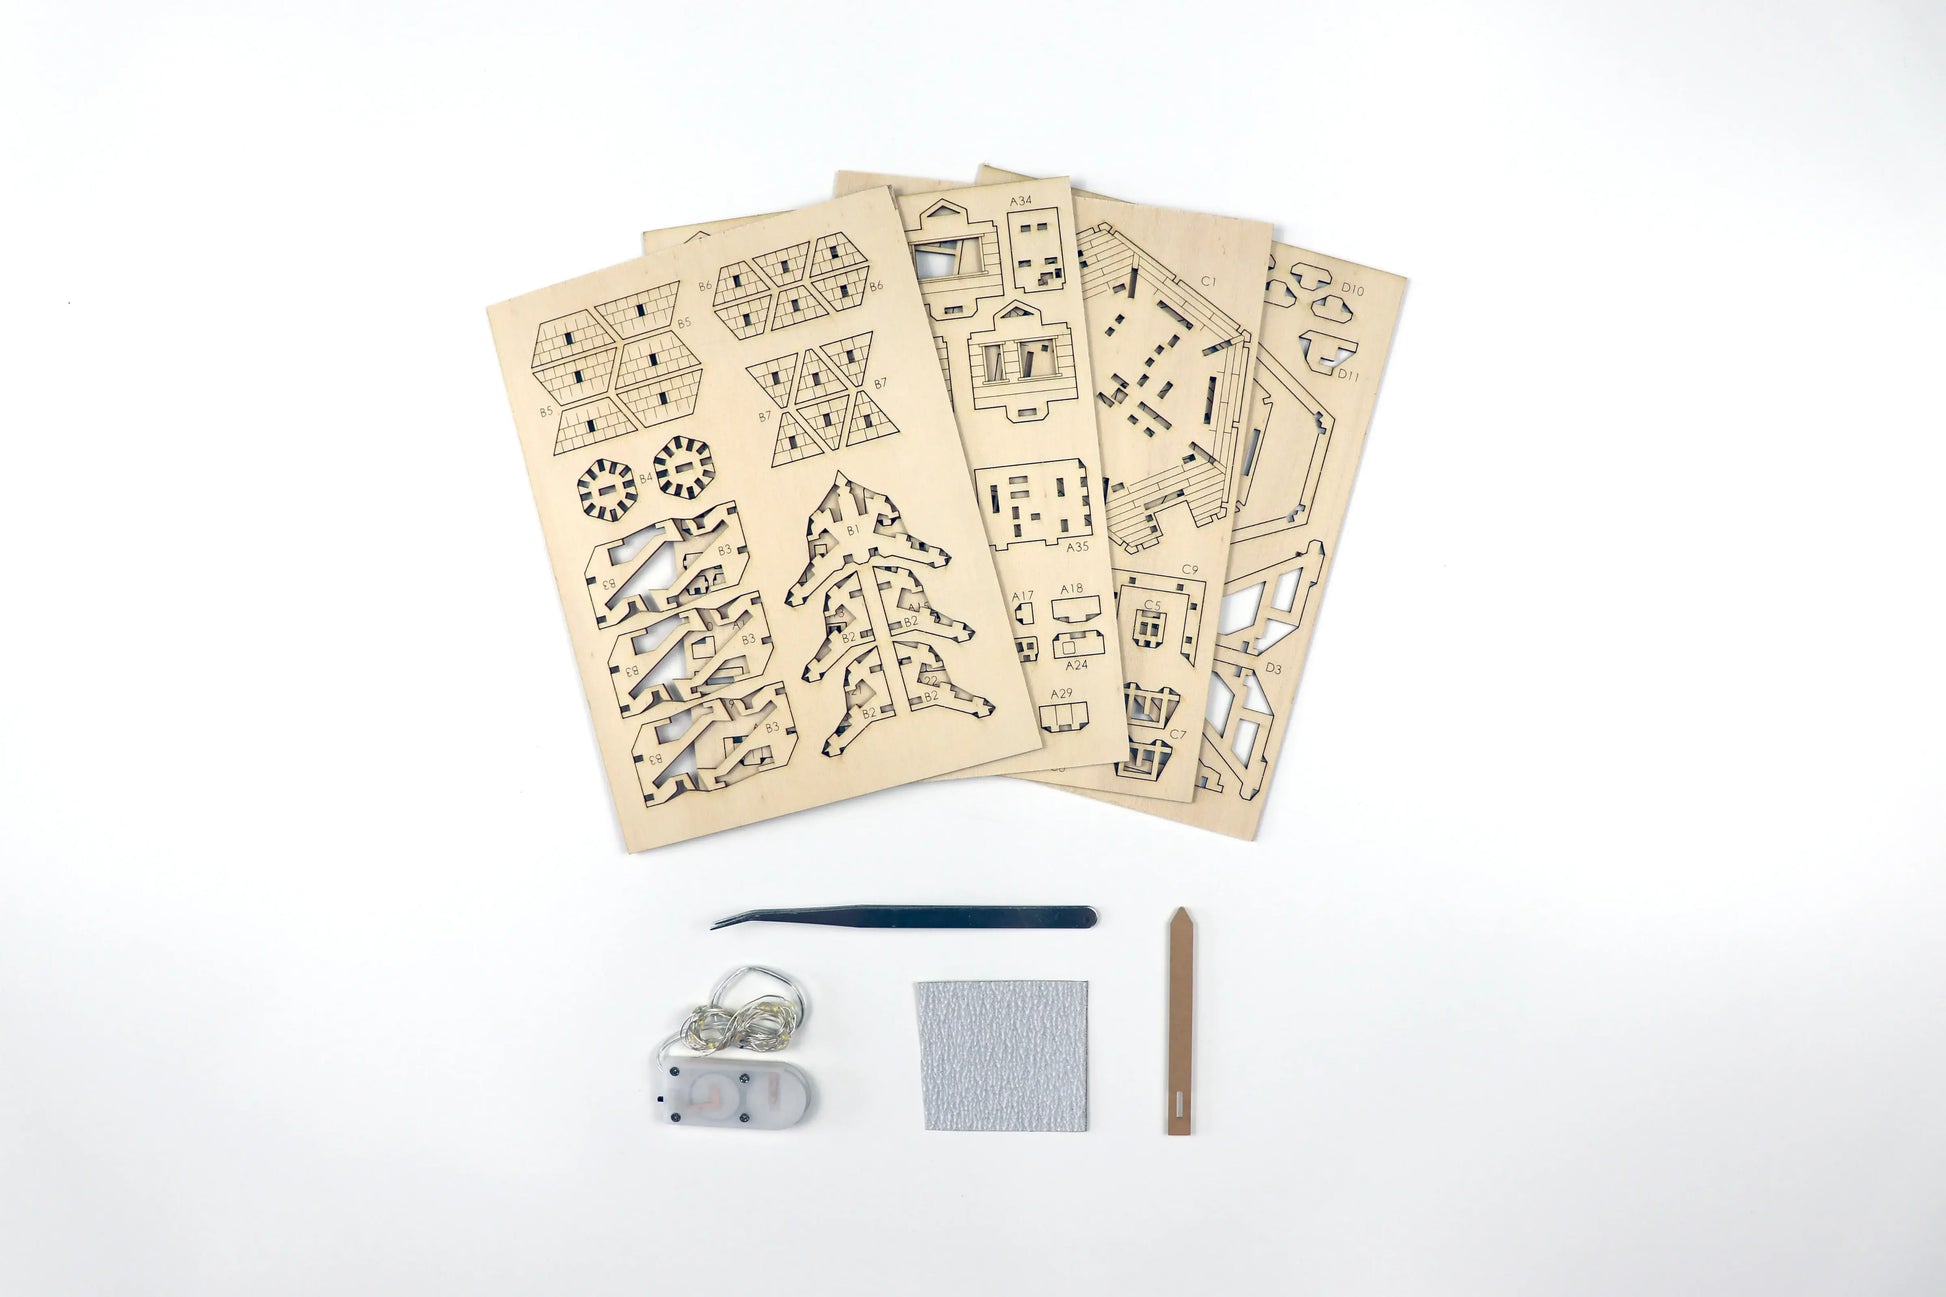 Pieces of a small wooden treehouse kit.